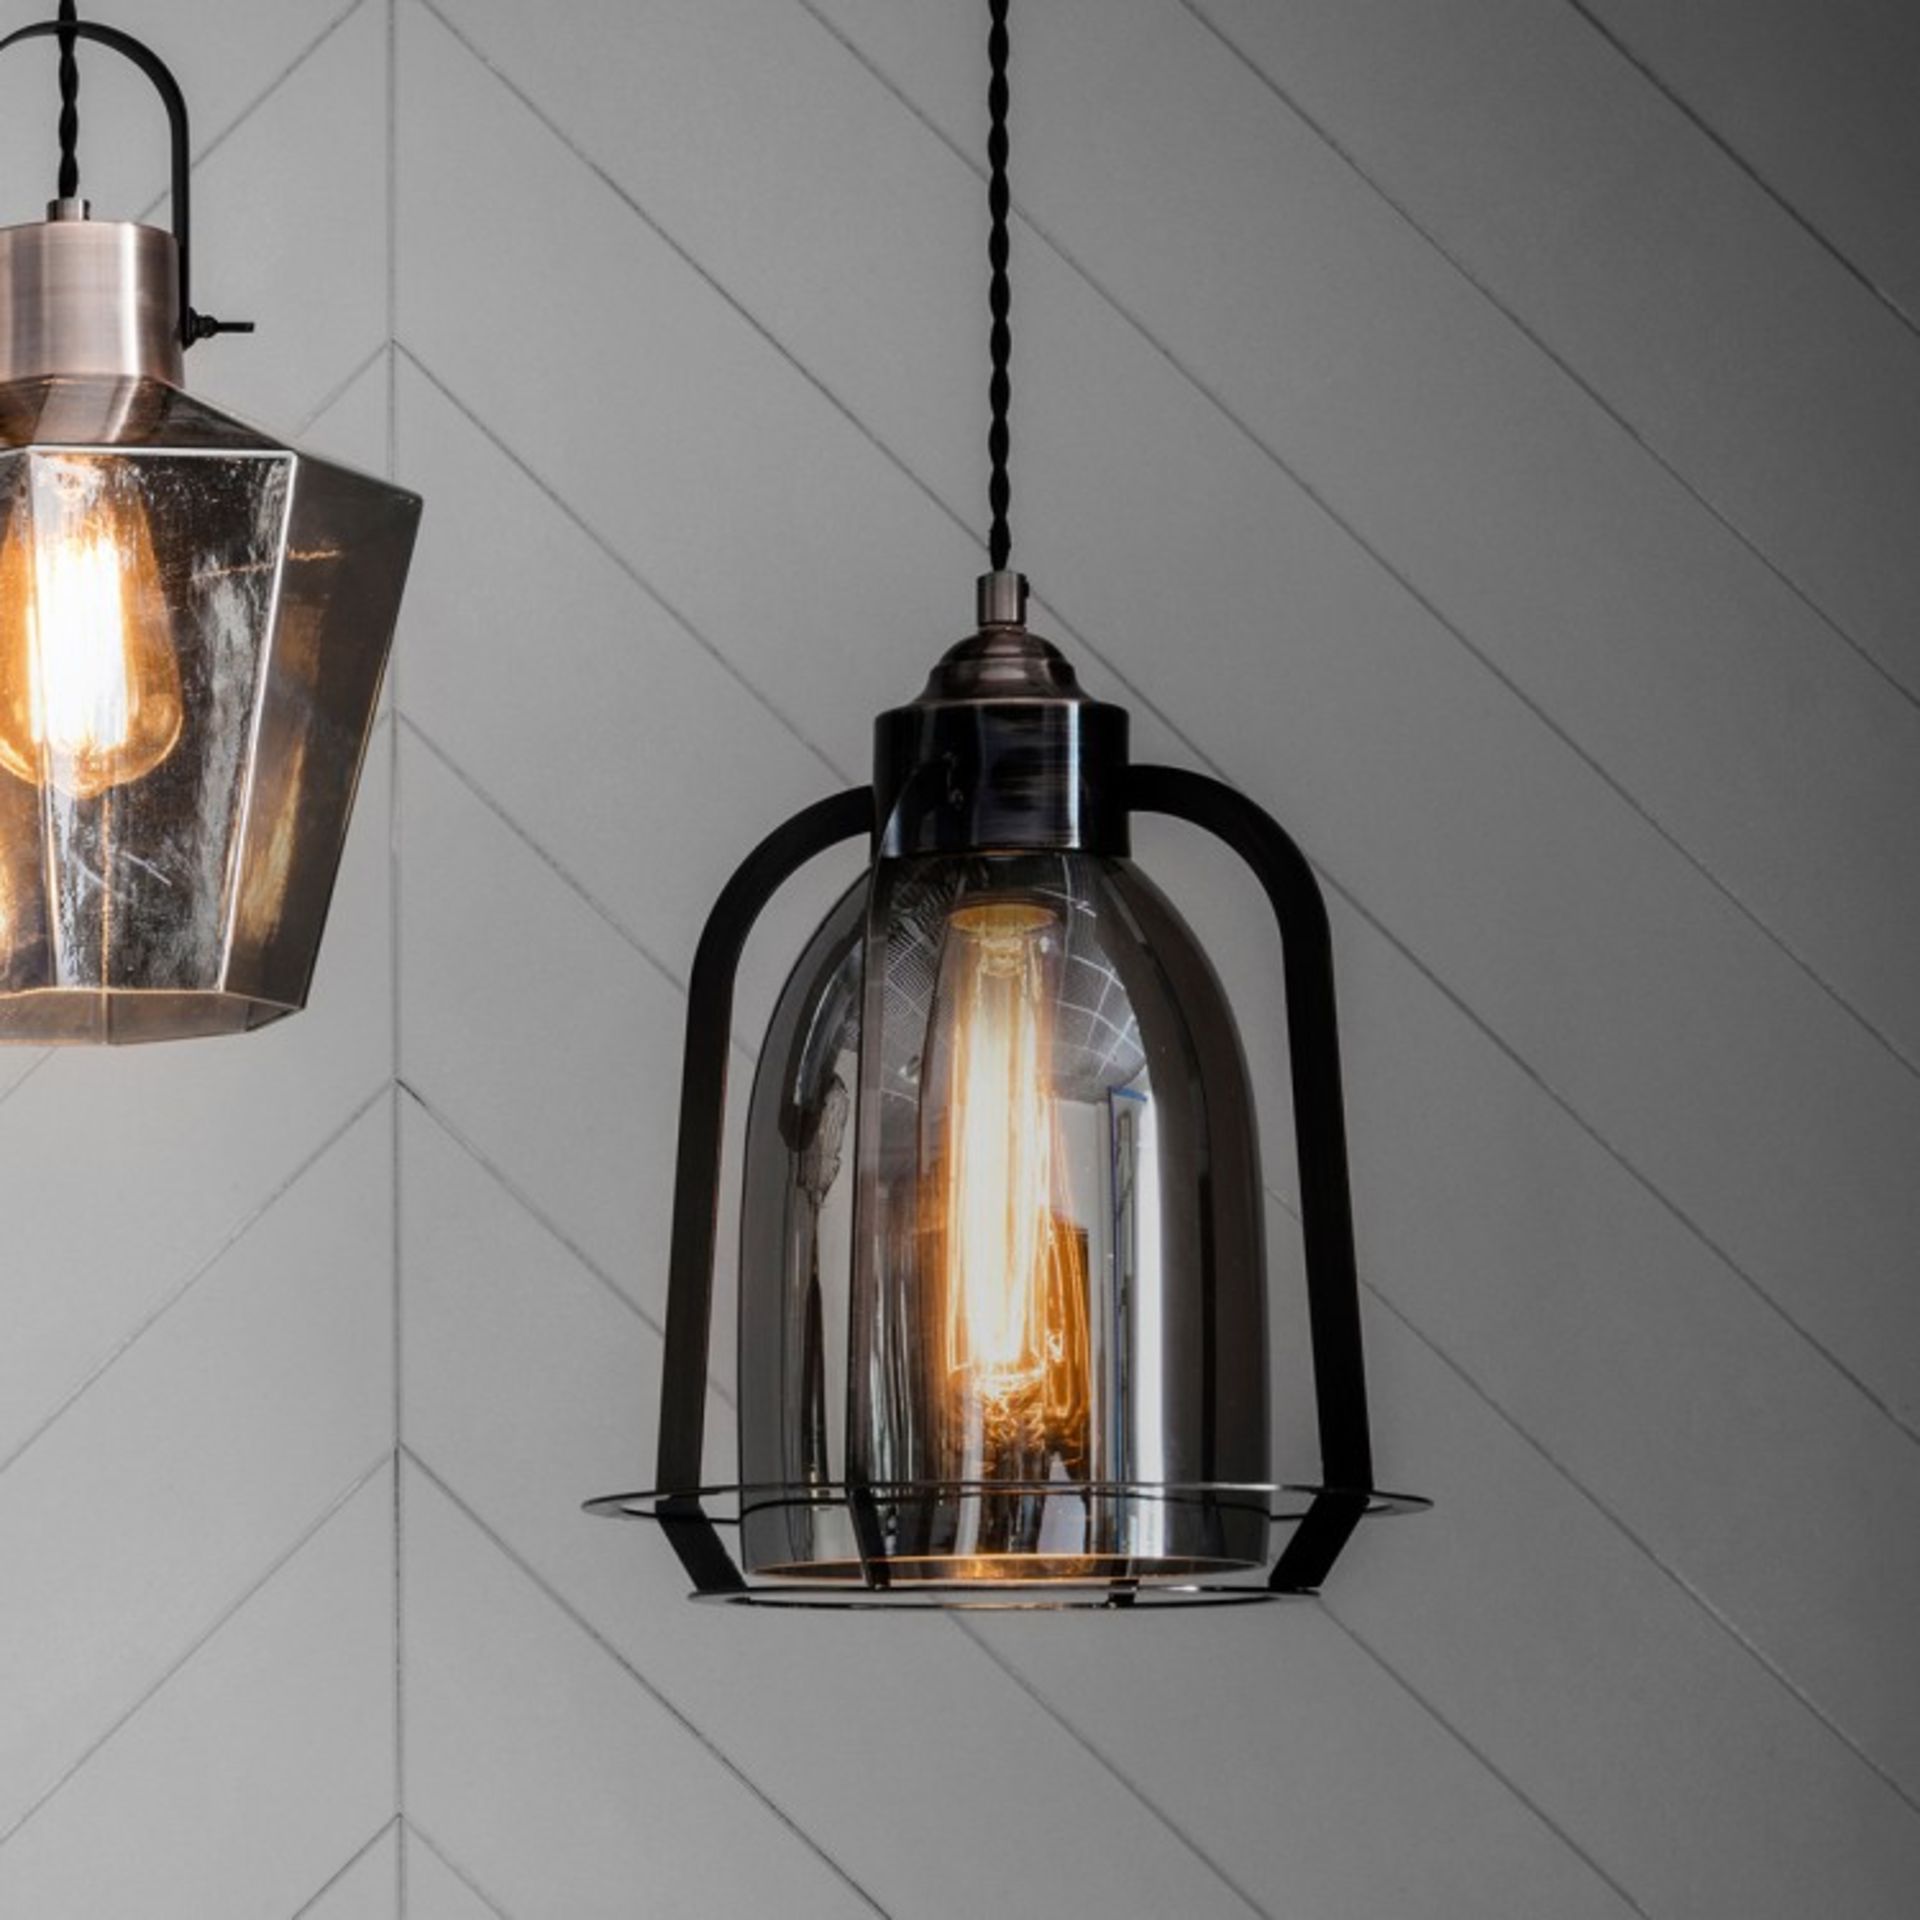 Aykley Pendant Light With a glass shade and industrial style metal surround this pendant light